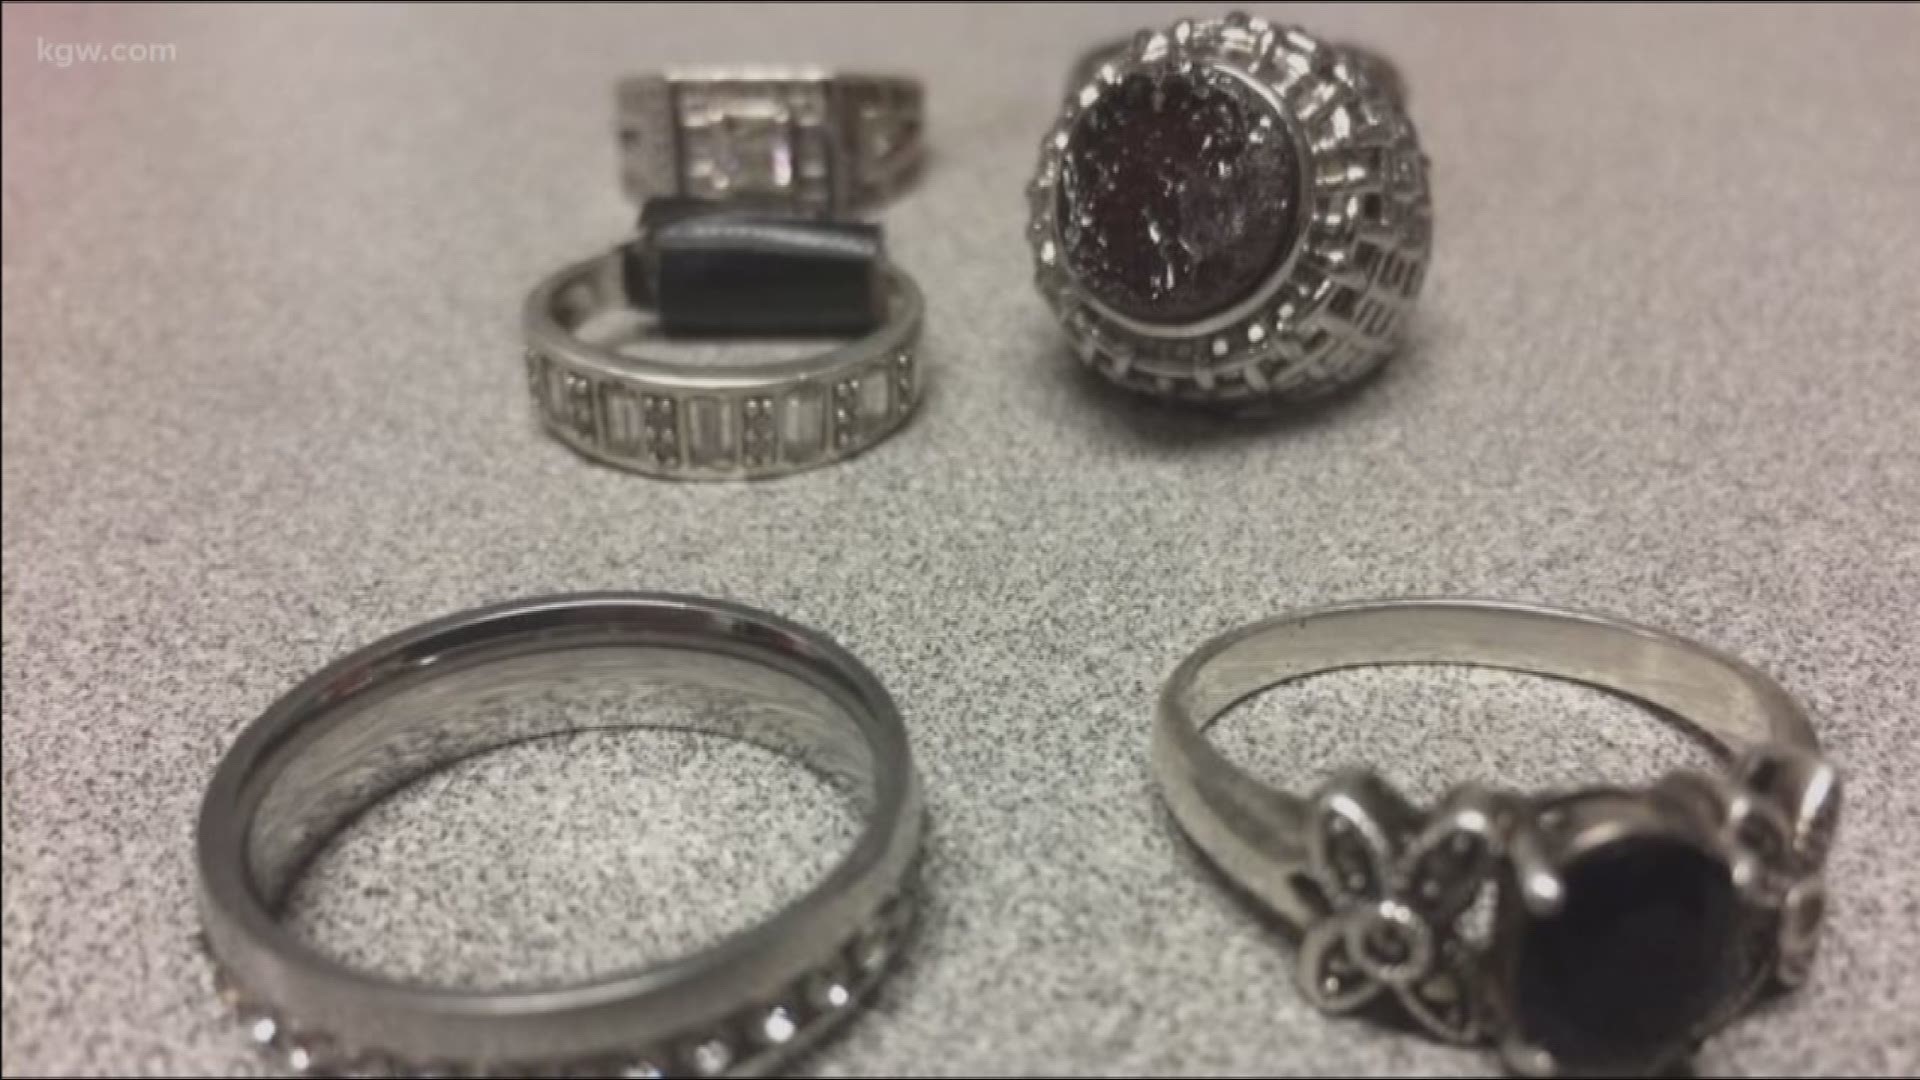 Police recovered stolen items from a burglary suspect found sleeping in a Washington County home Wednesday, and now they're looking for the owners of those items.